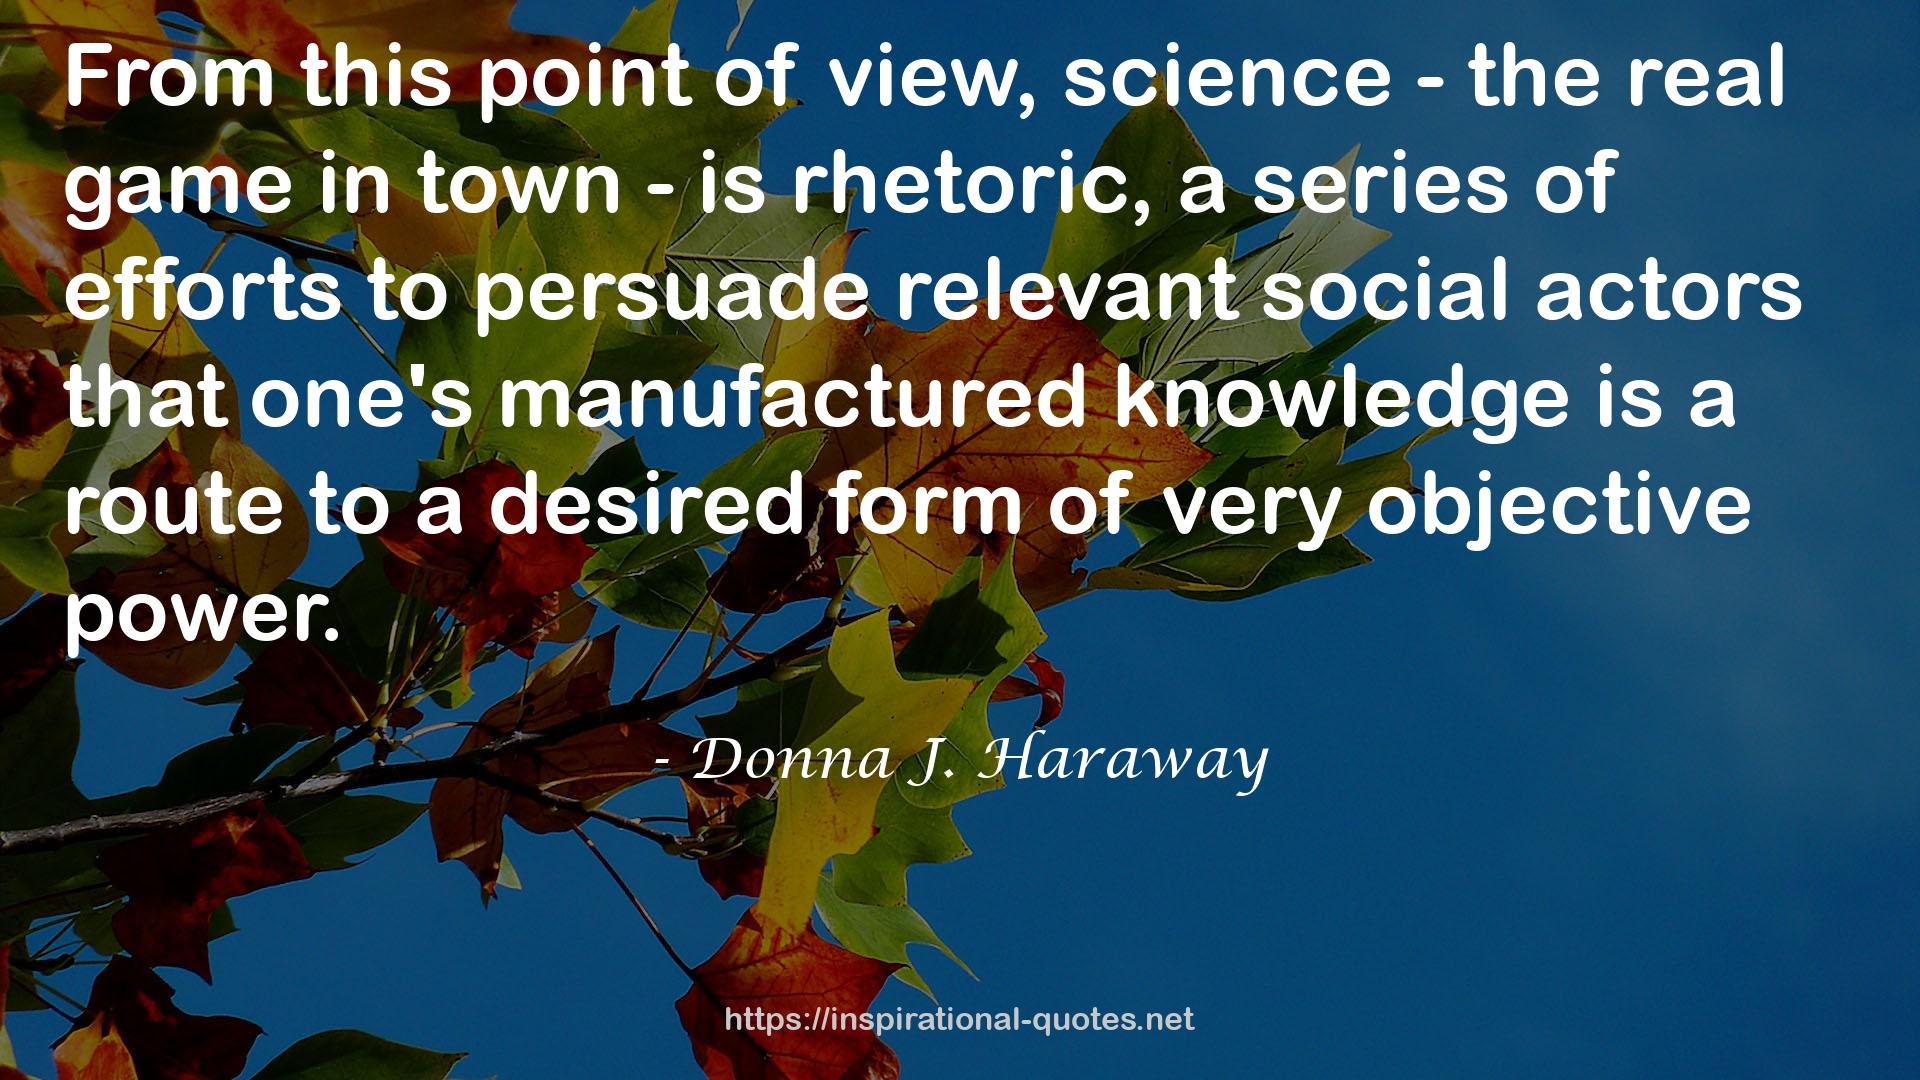 Donna J. Haraway QUOTES